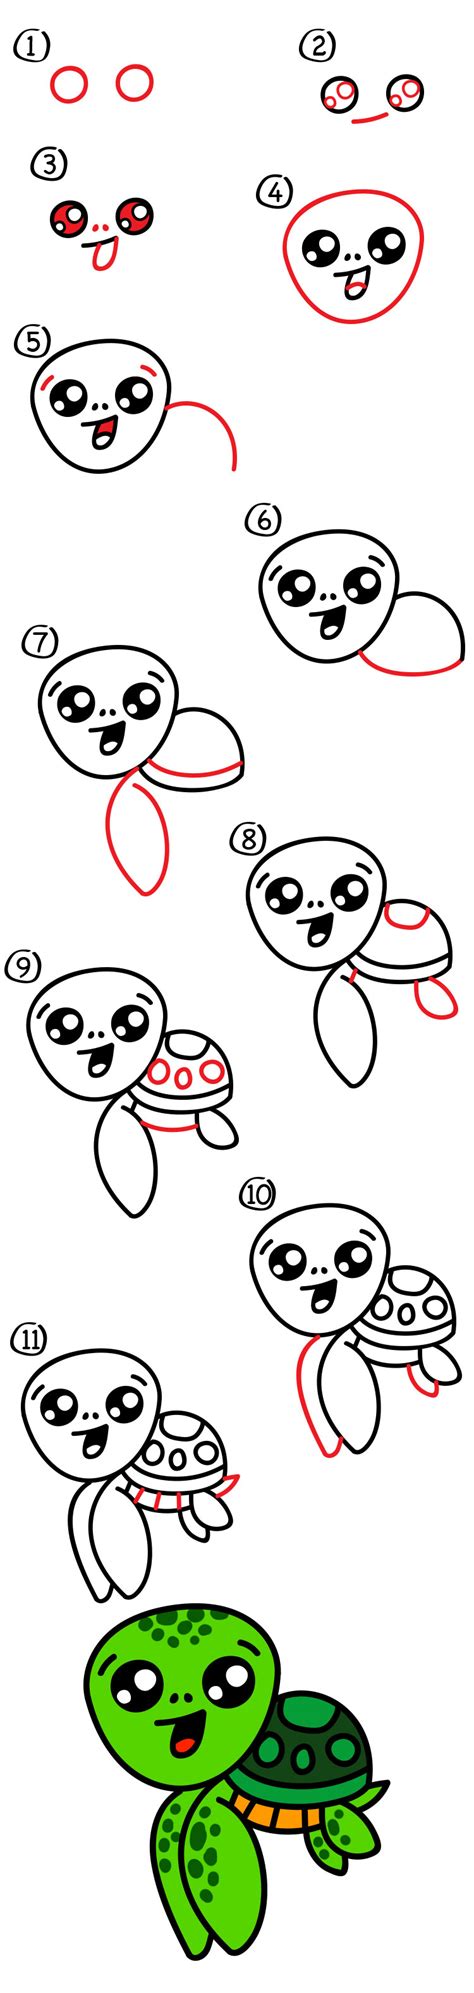 Turtles are adorable, with their silly shells and a head and legs that pop out of the shell. How To Draw A Cartoon Sea Turtle - Art For Kids Hub